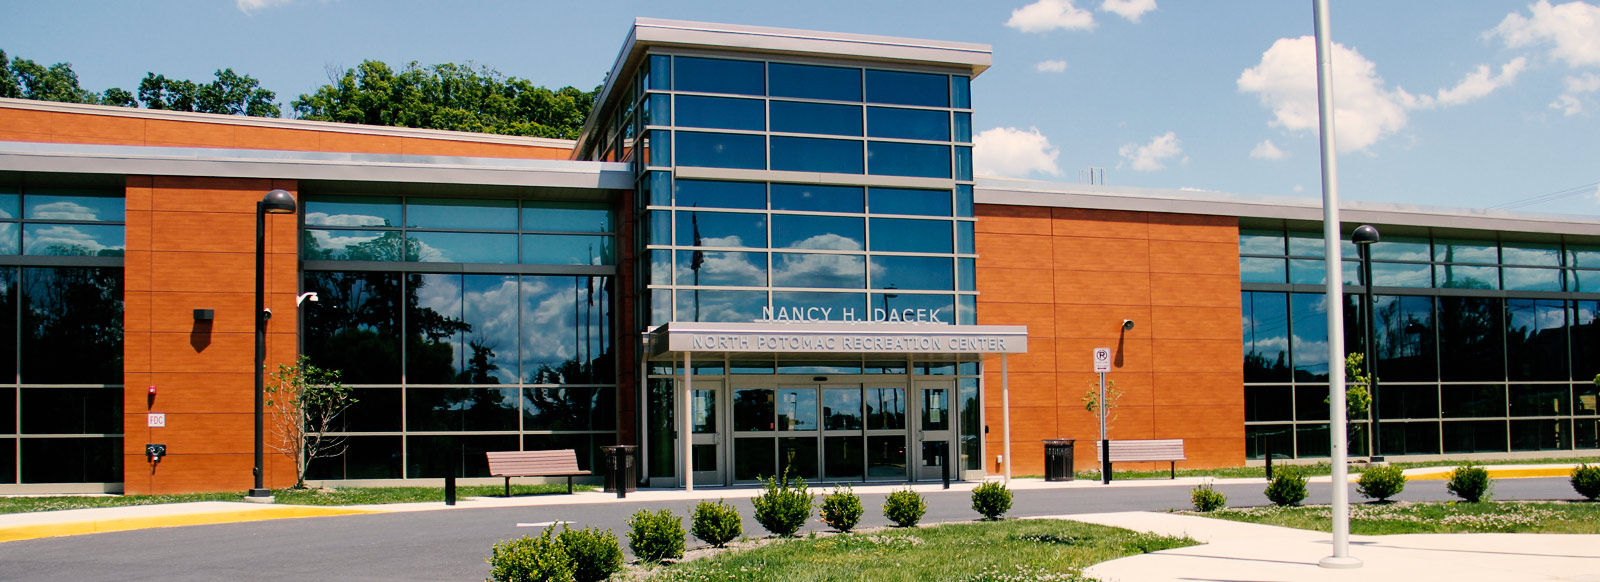 nvan design: Community Centers In Montgomery County Maryland